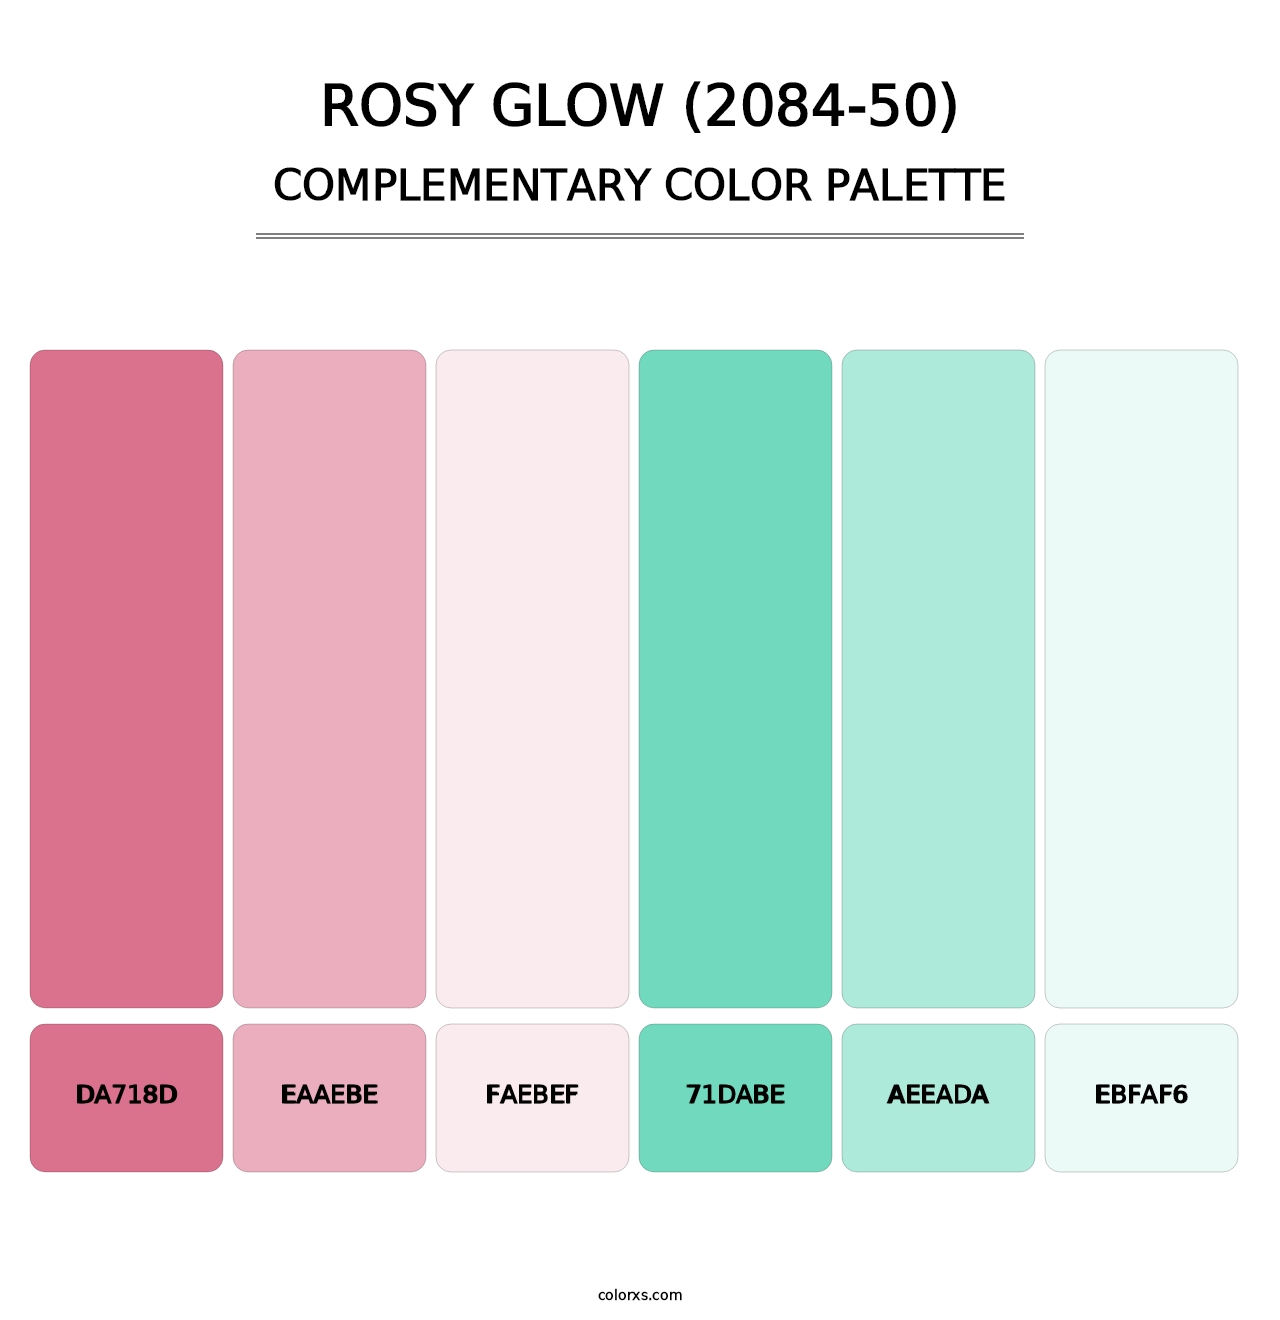 Rosy Glow (2084-50) - Complementary Color Palette